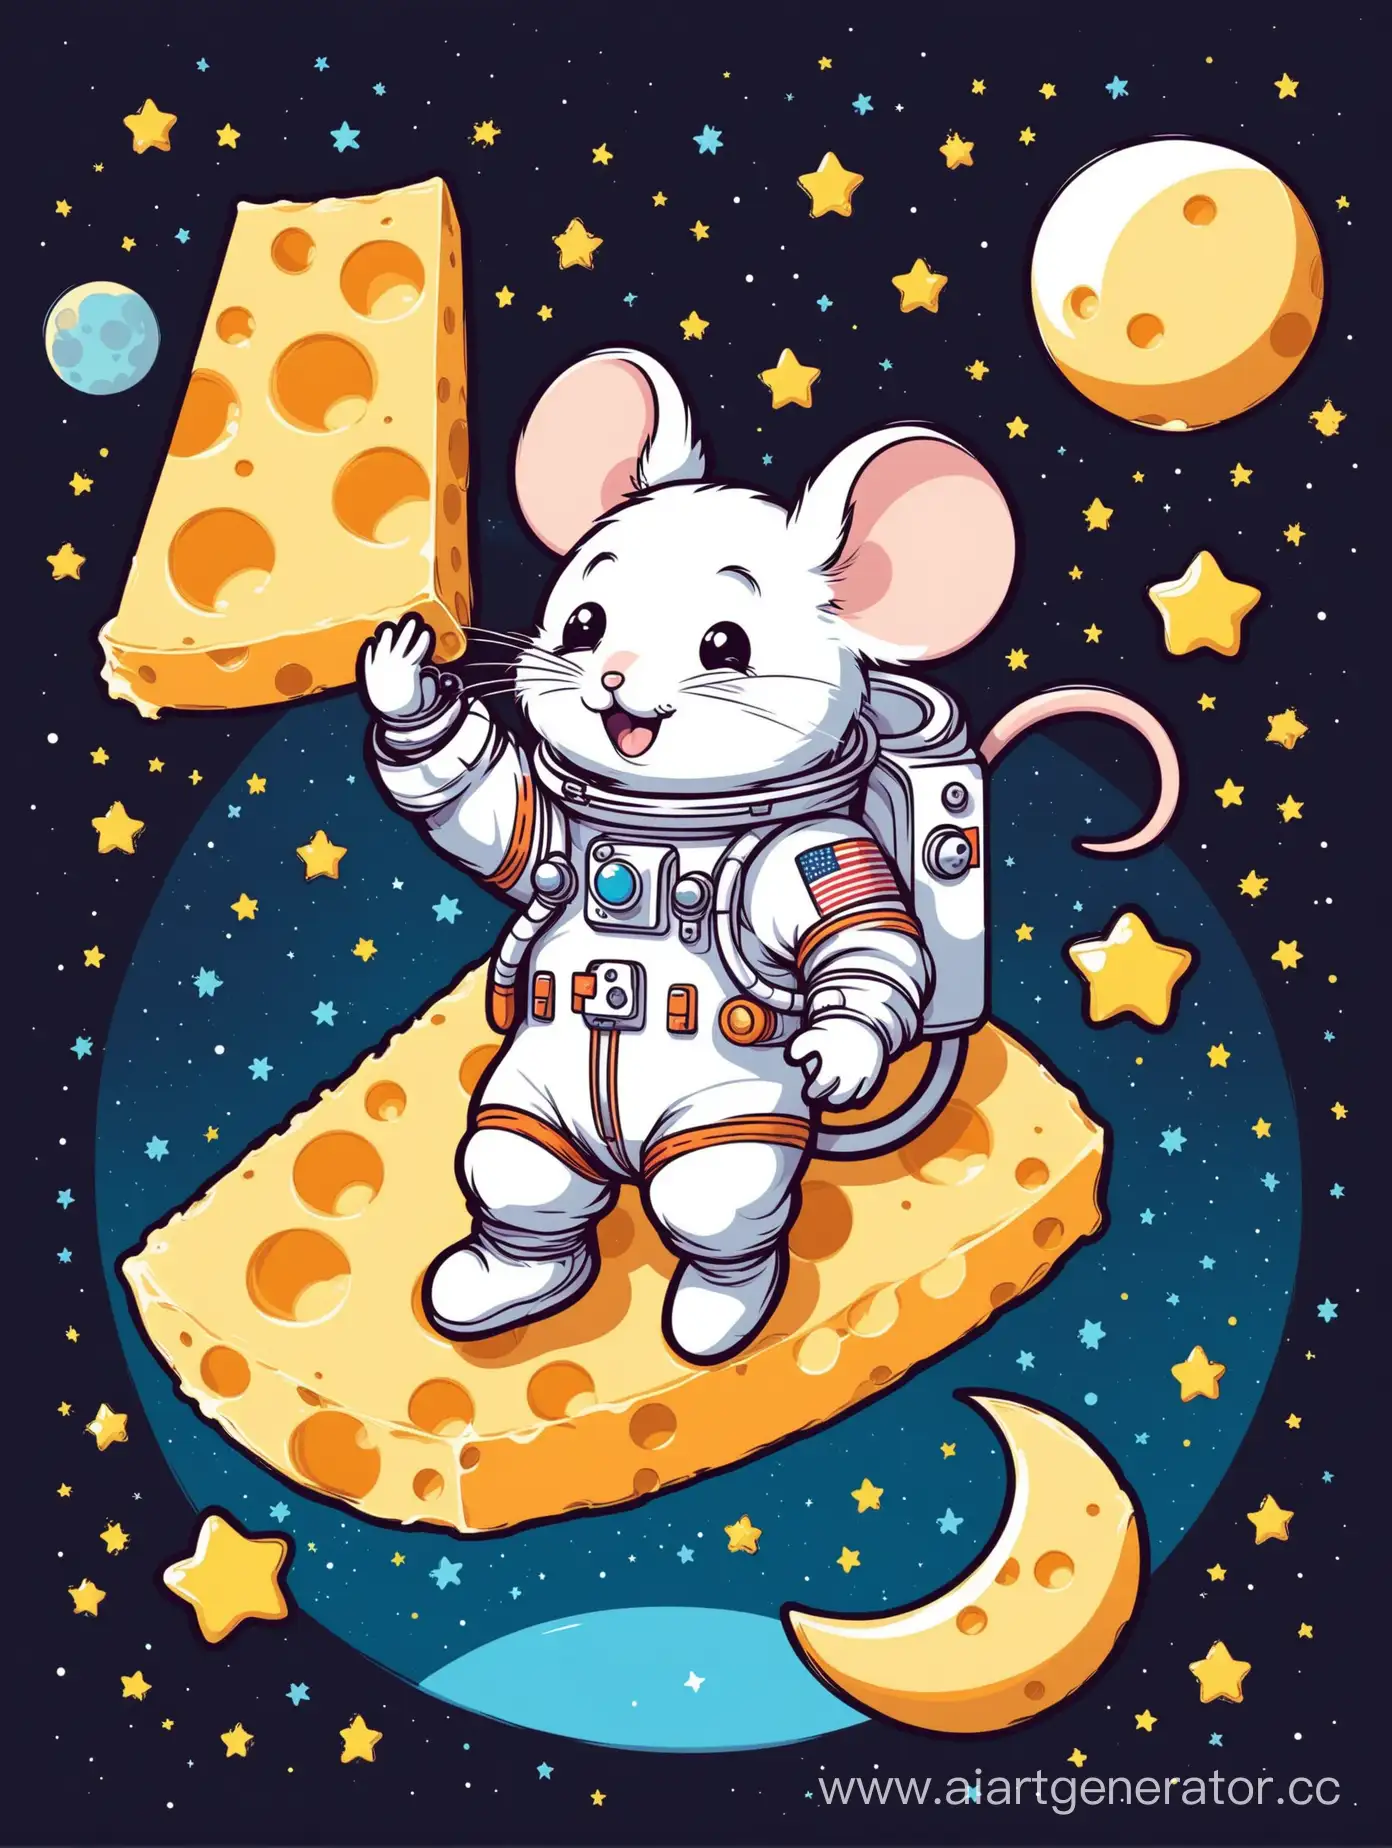 Mouse-Astronaut-Holding-Cheese-Moon-Vector-Art-in-Cartoon-Style